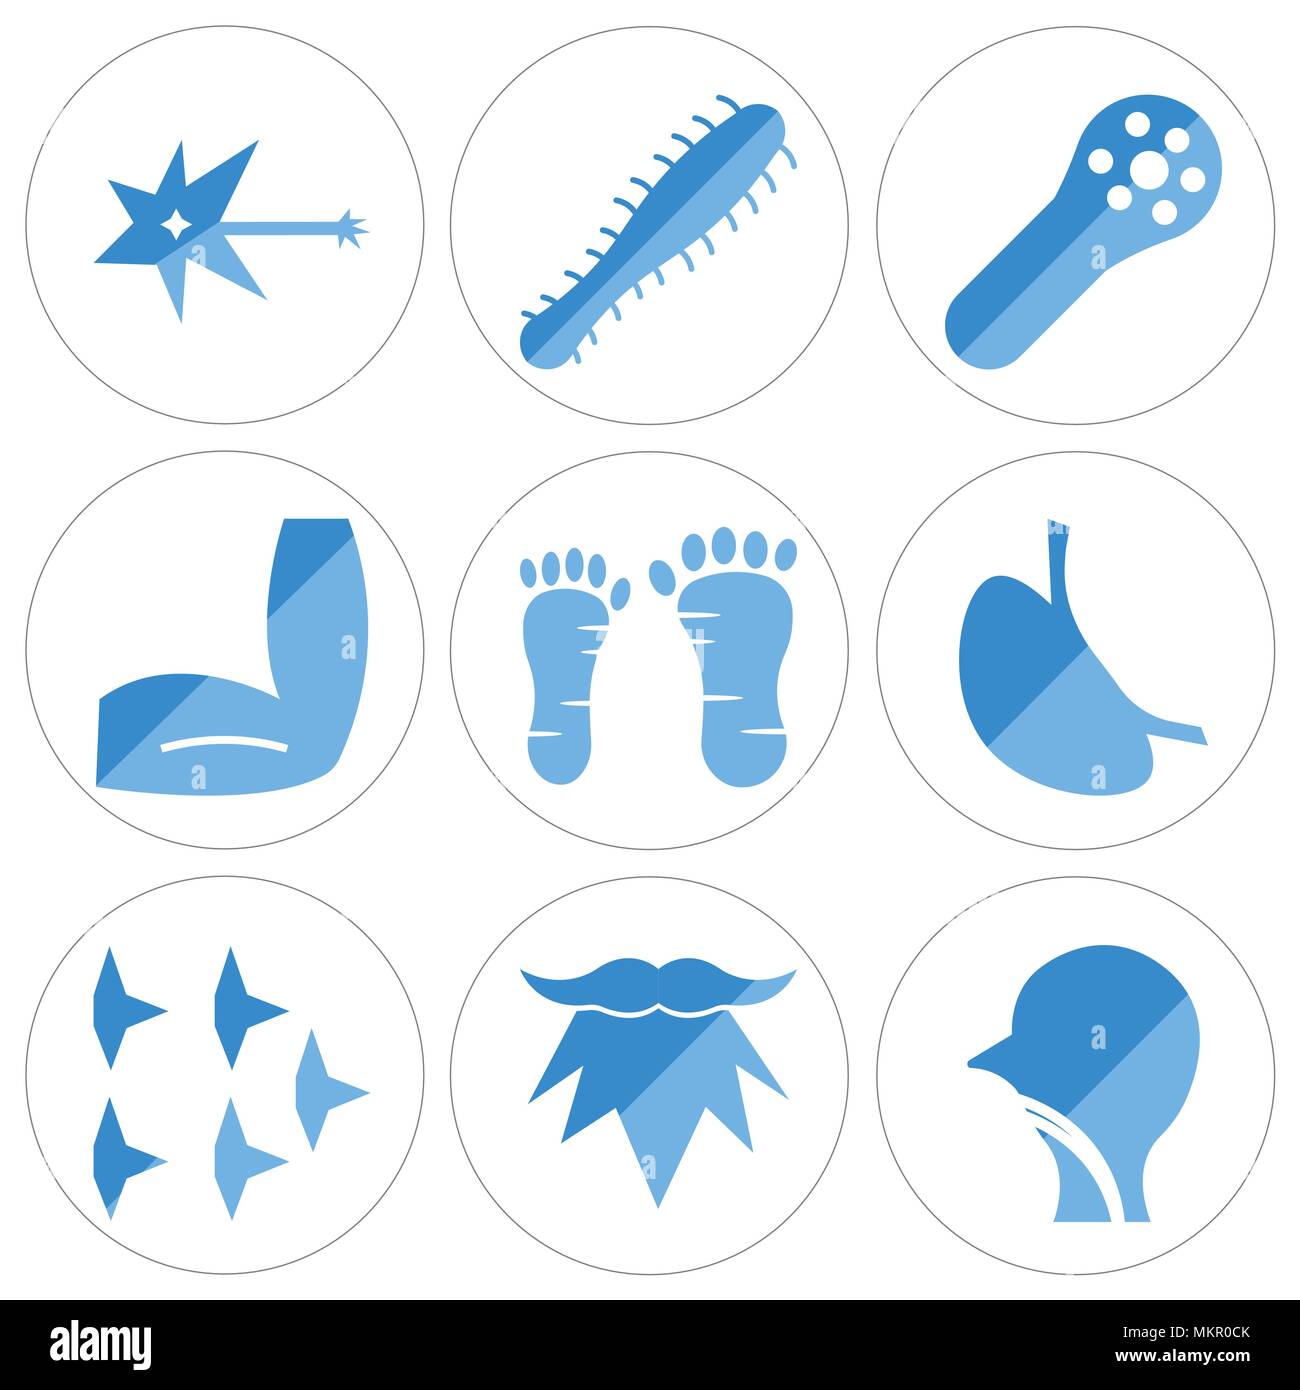 Set Of 9 simple editable icons such as Human Trachea, Men Beard, Platelets, Stomach with Liquids, Foot, Elbow, Muscle Fiber, Three Bacteria, Neuron, c Stock Vector